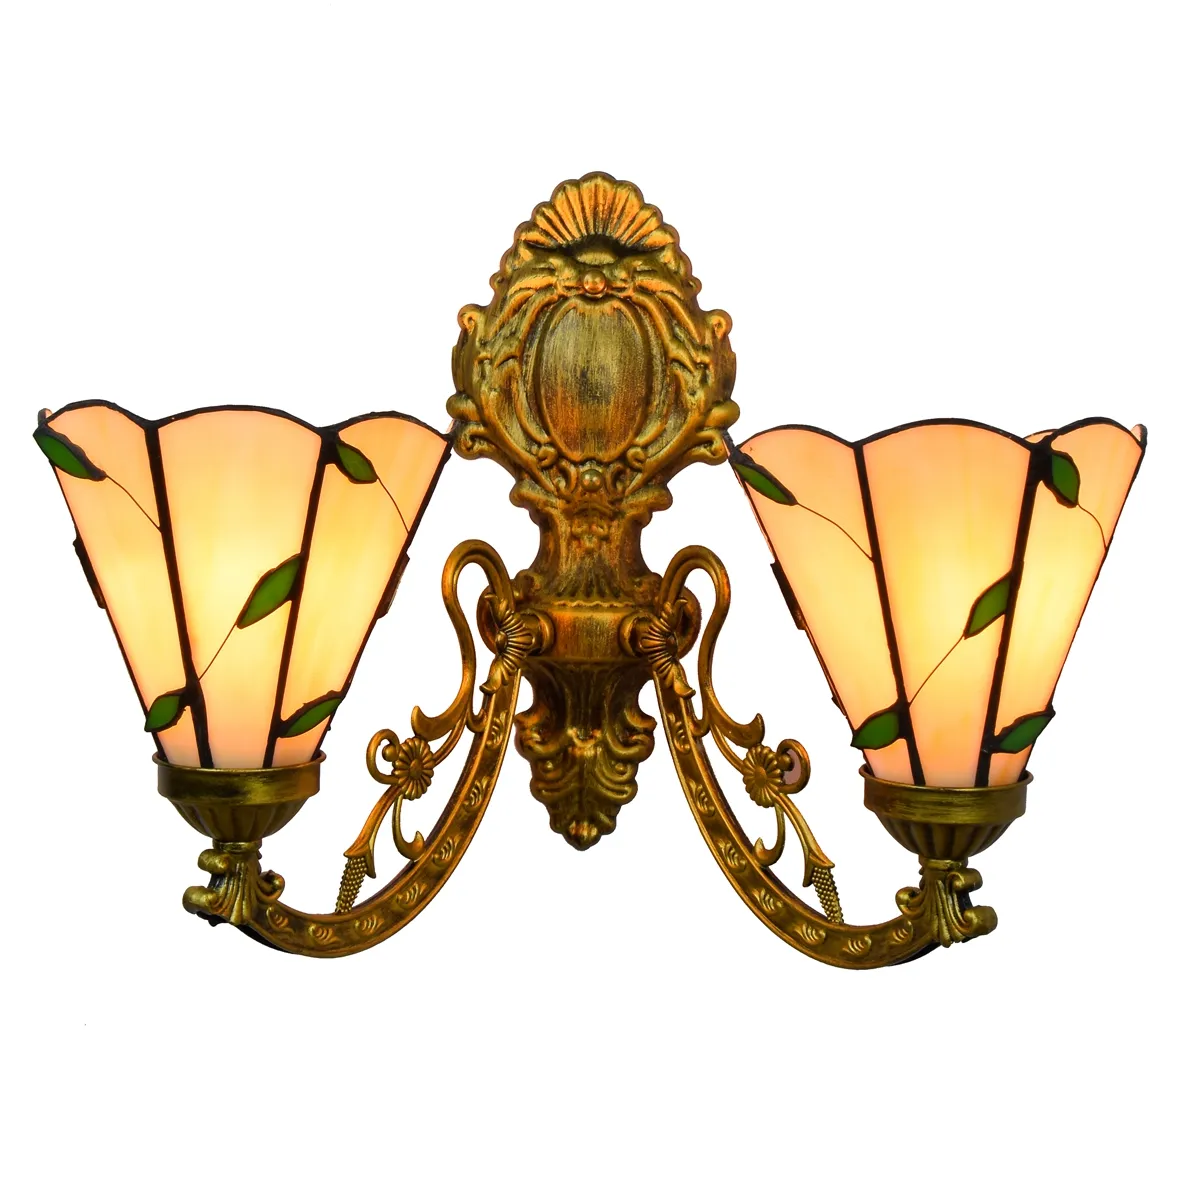 Tiffany Wall Sconce lamp 2 Lights Stained Glass Wall Sconces Lighting for Bedroom Hallway Stairway Balcony Cloakroom